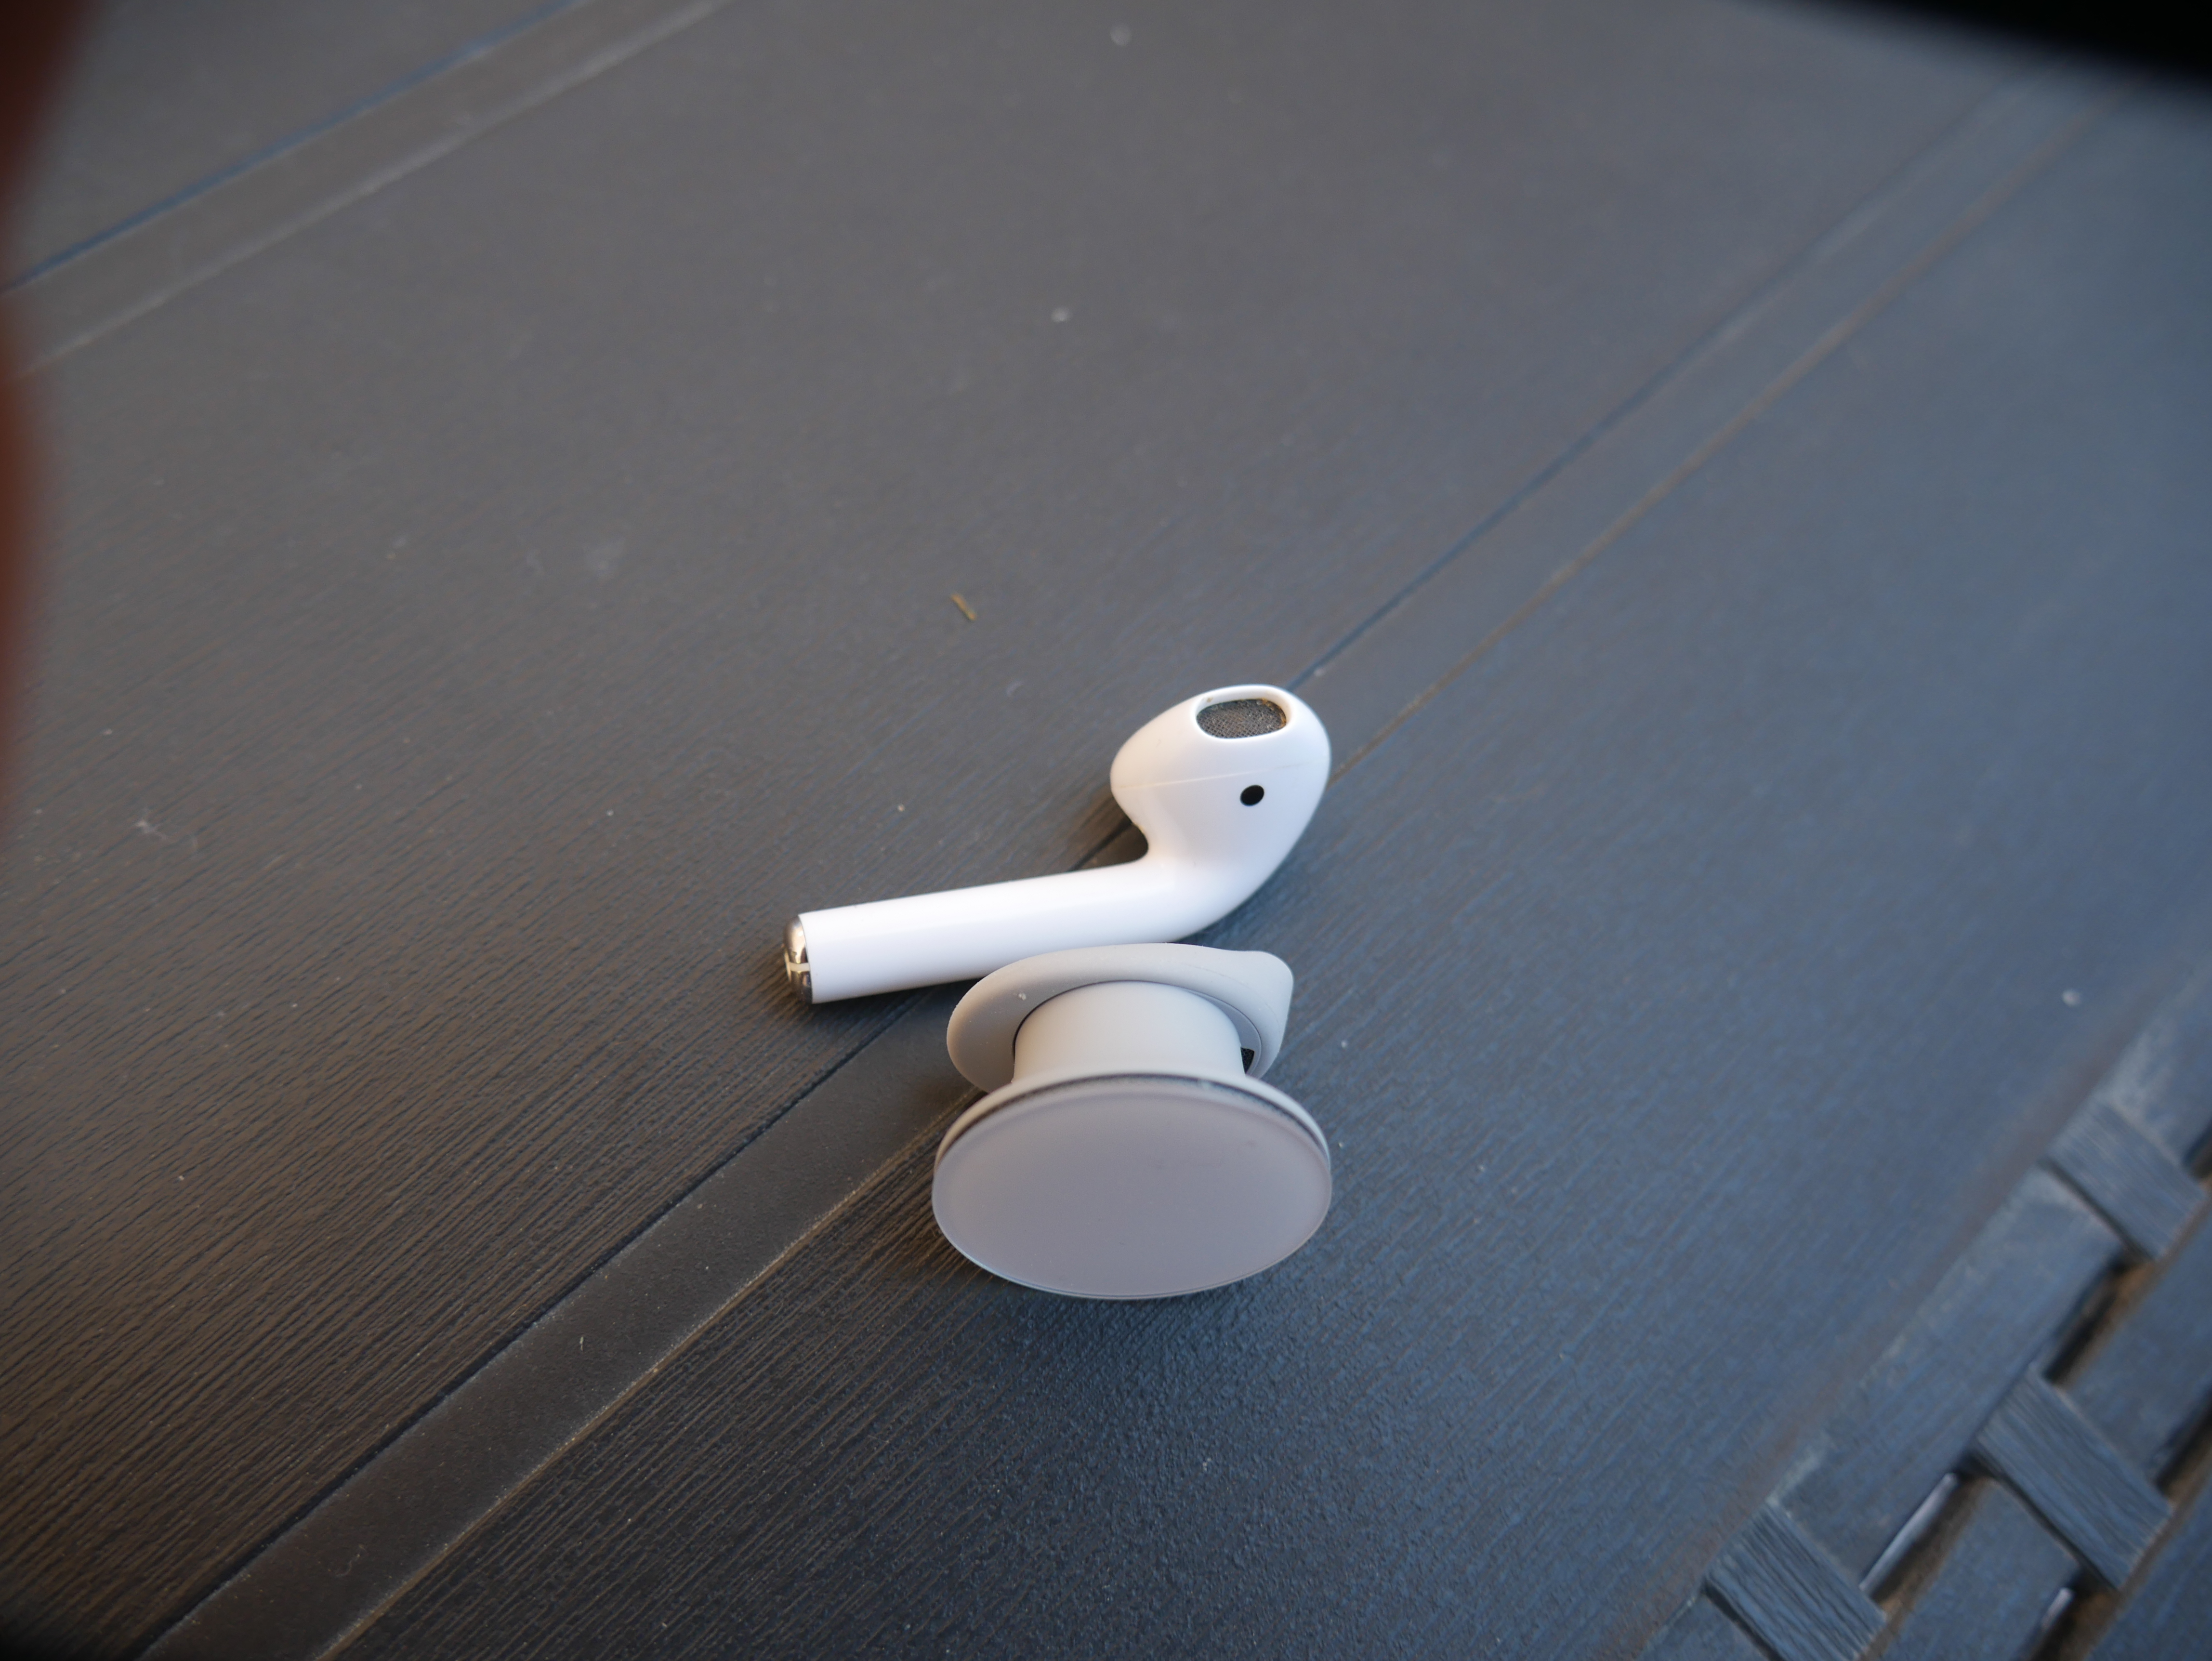 Surface Earbuds y Airpod